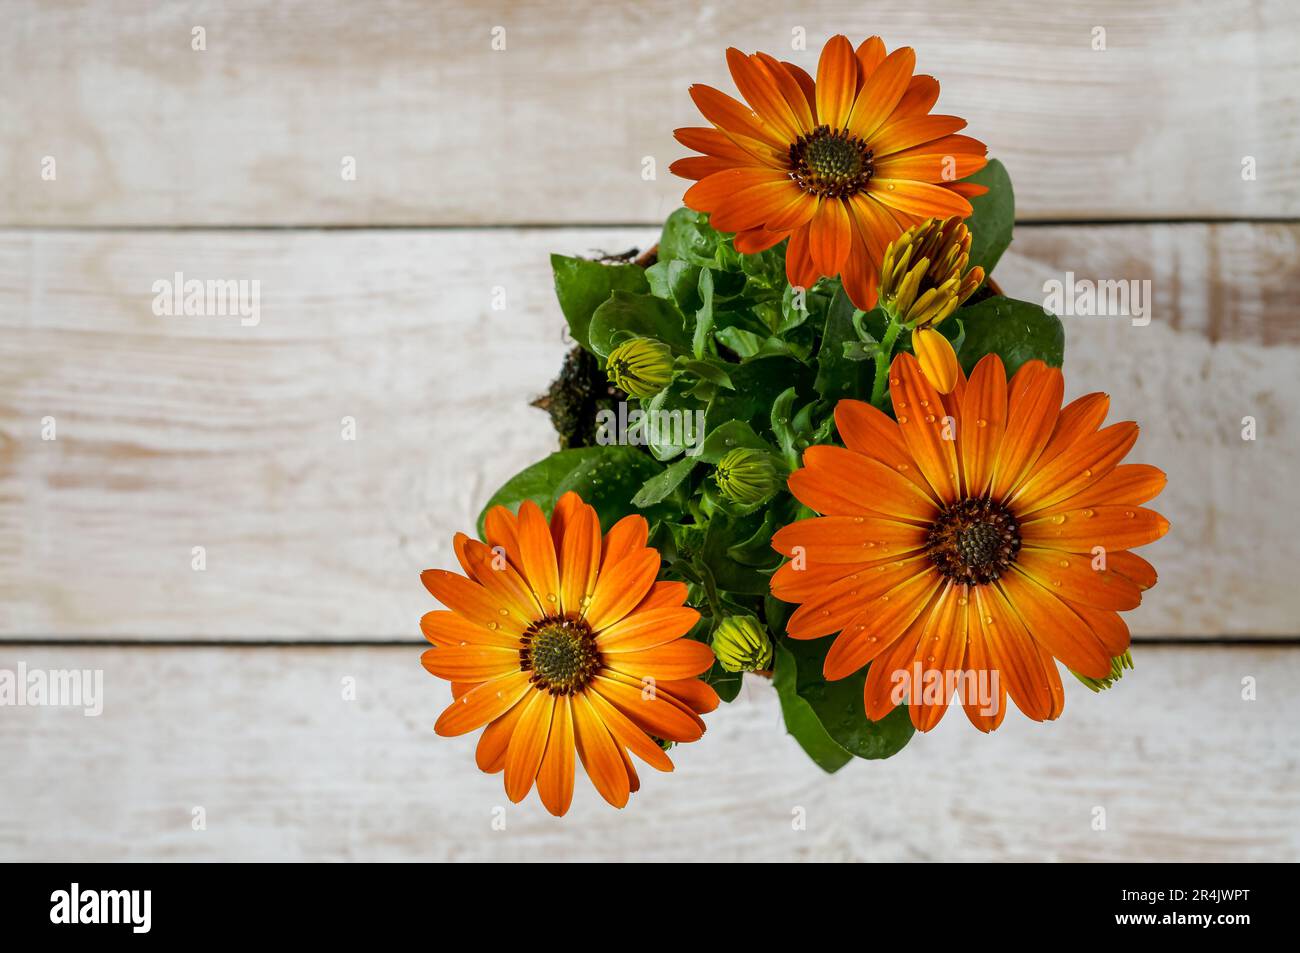 African daisy,Osteospermum,delicate flowers in warm sunny colors,two-colored orange petals,yellow petals with drops of water,a spectacular ornamental Stock Photo